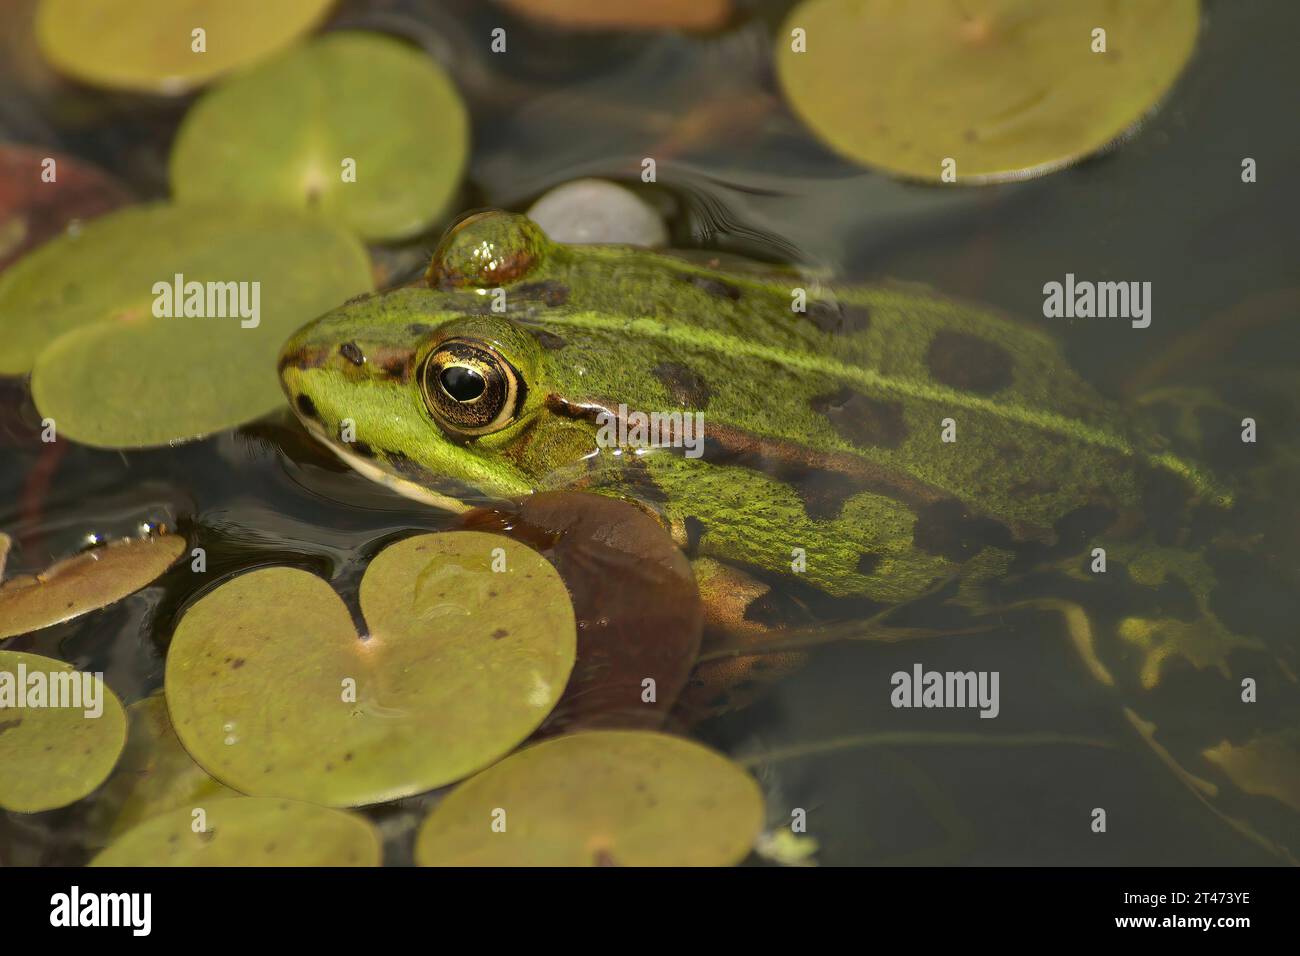 Natural closeup on a European green frog, Pelophylax species, sitting in a pond between the weeds Stock Photo